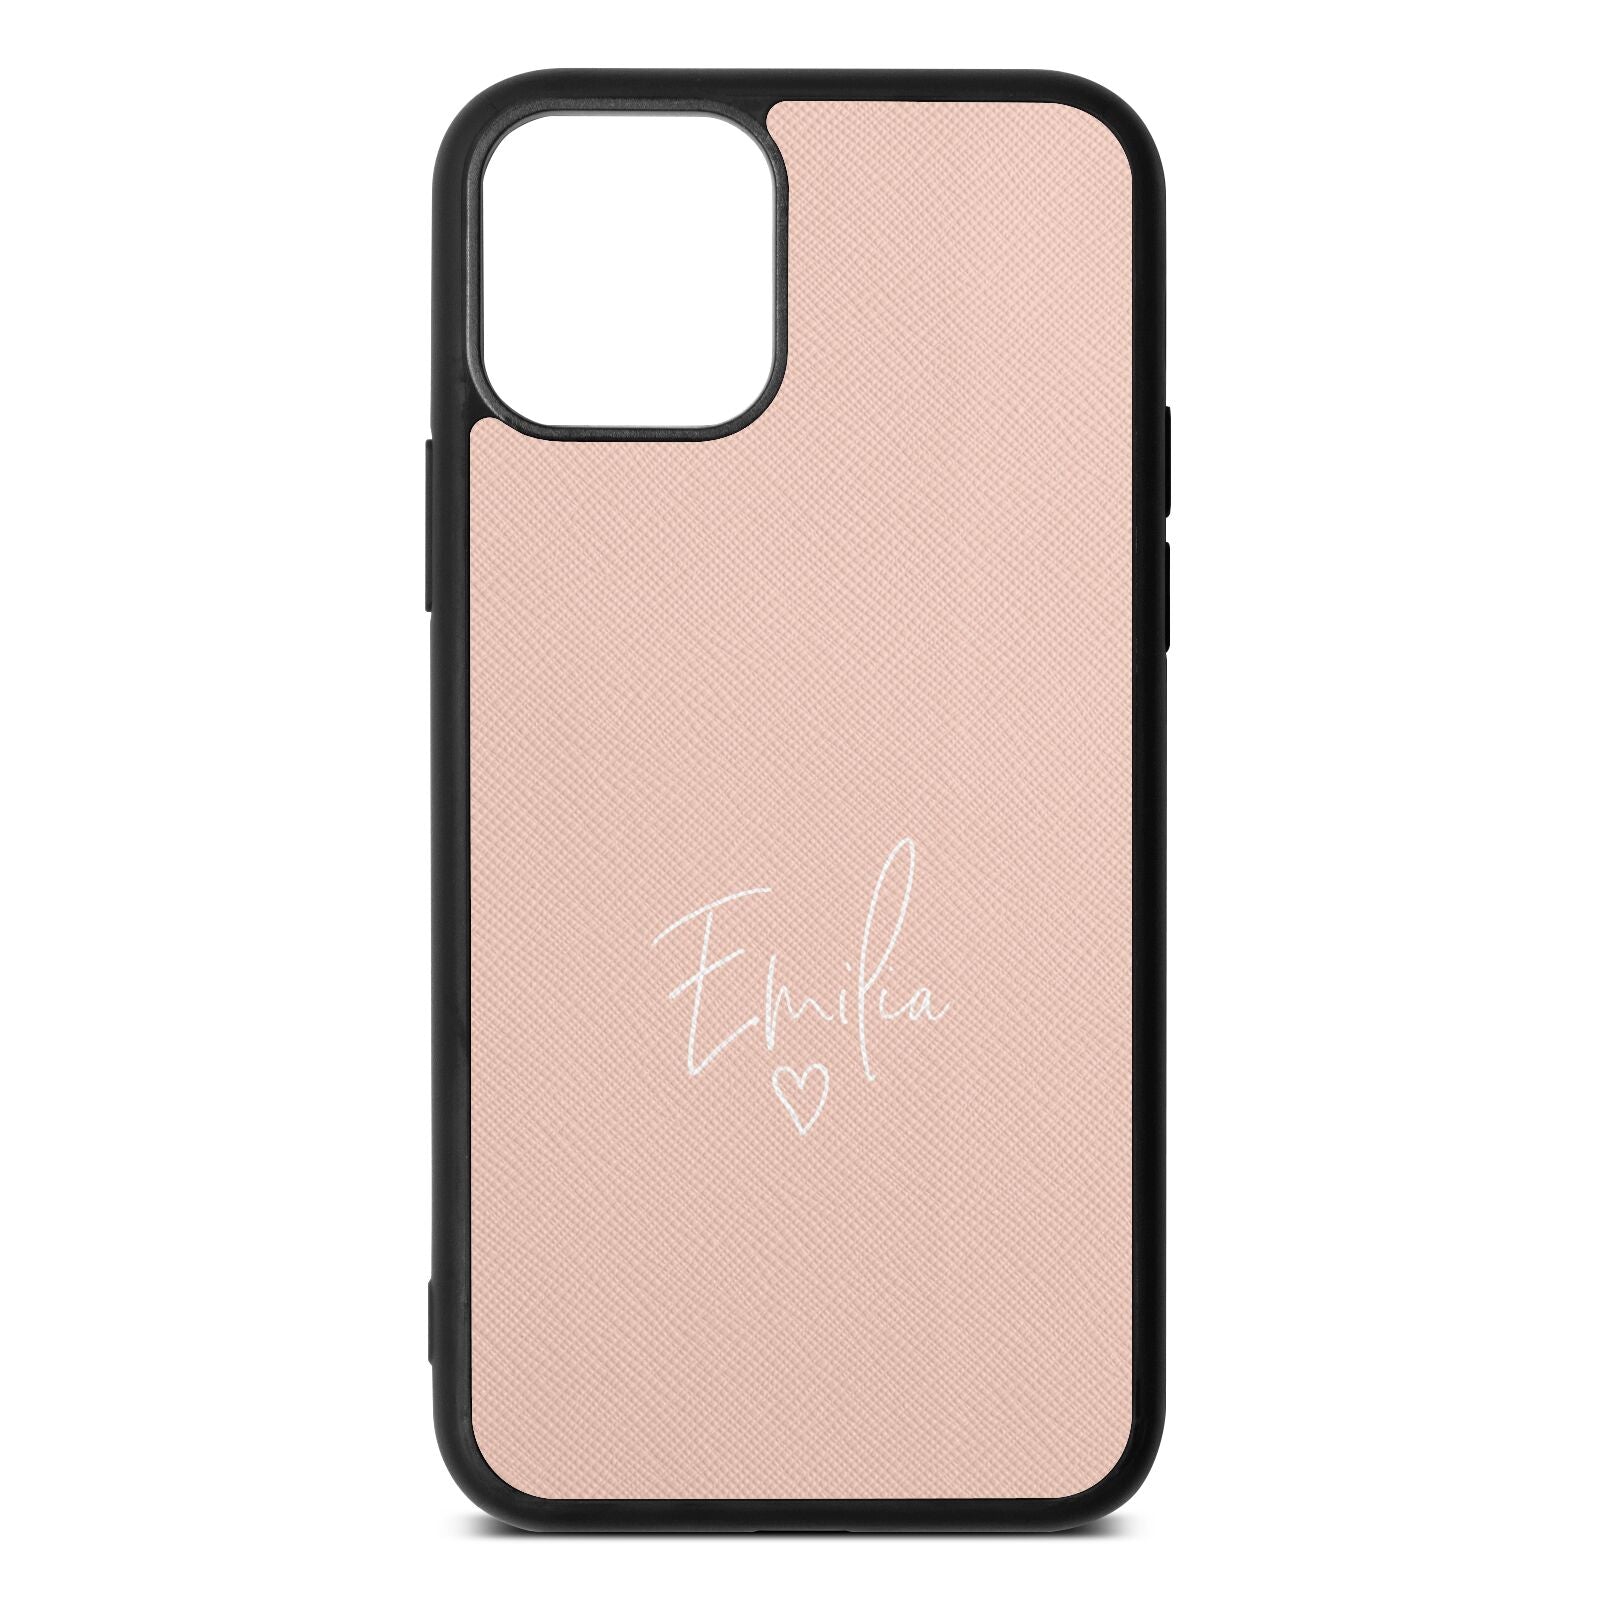 White Handwritten Name Transparent Nude Saffiano Leather iPhone 11 Pro Case